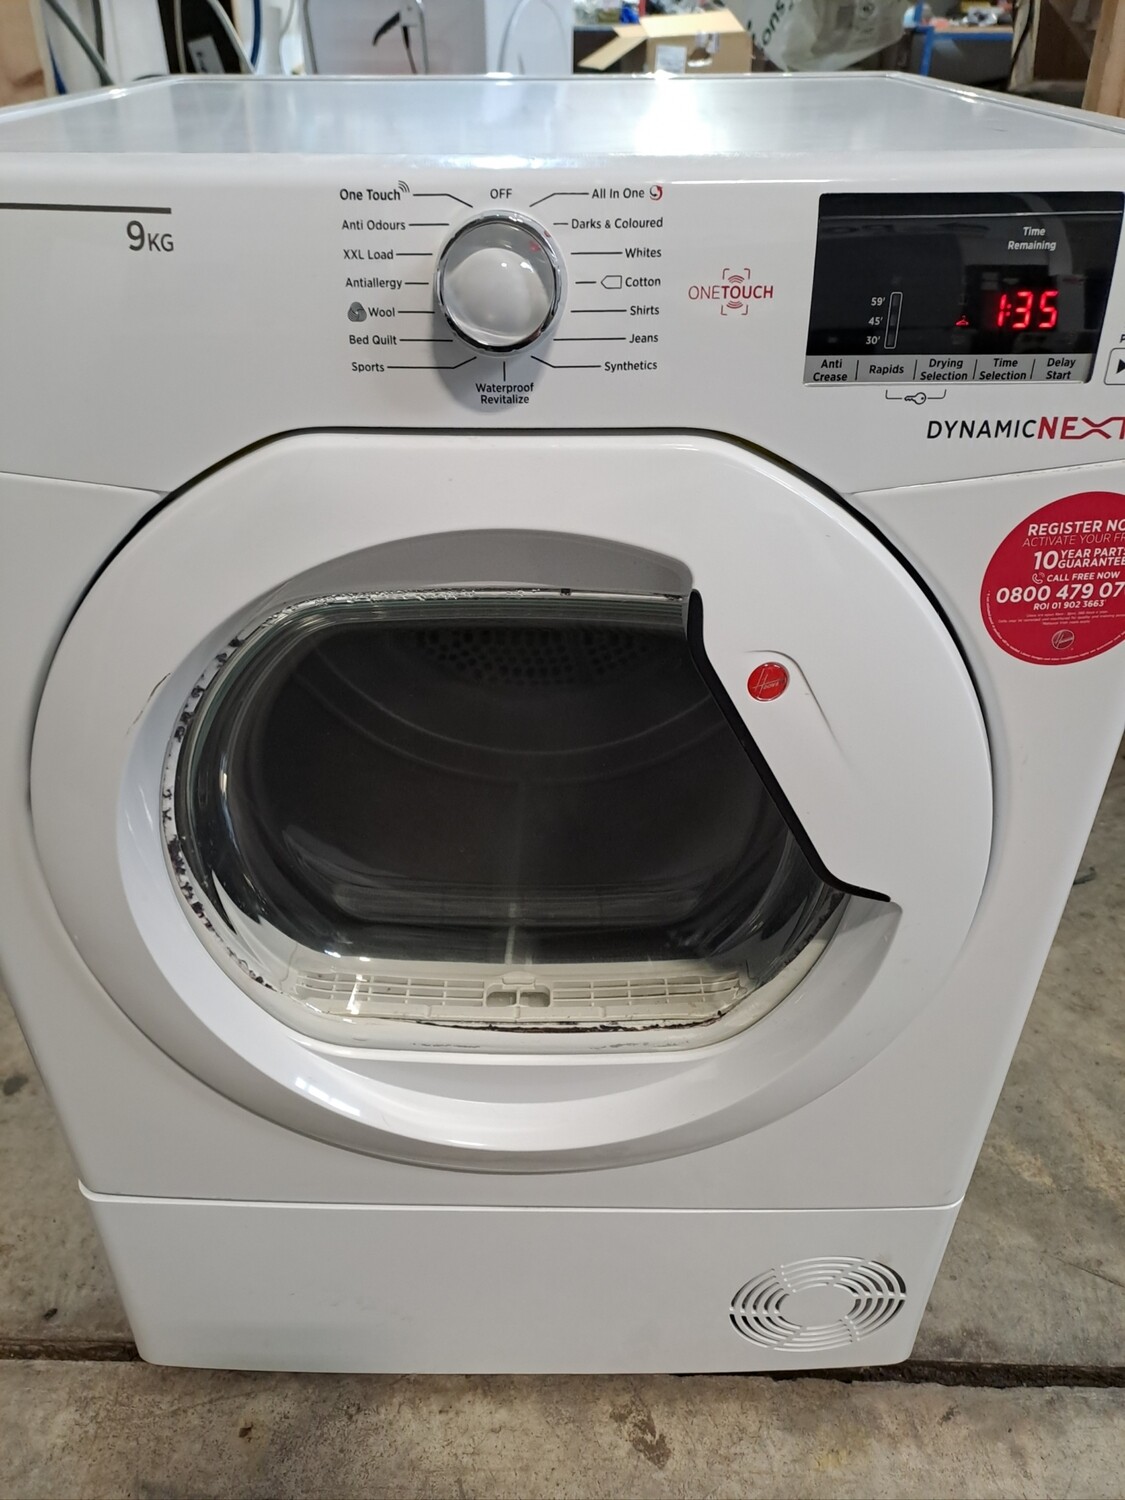 Hoover DXC9DG80 9kg Condenser Dryer White Refurbished 6 Months Guarantee. This item is located in our Whitby Road Shop 